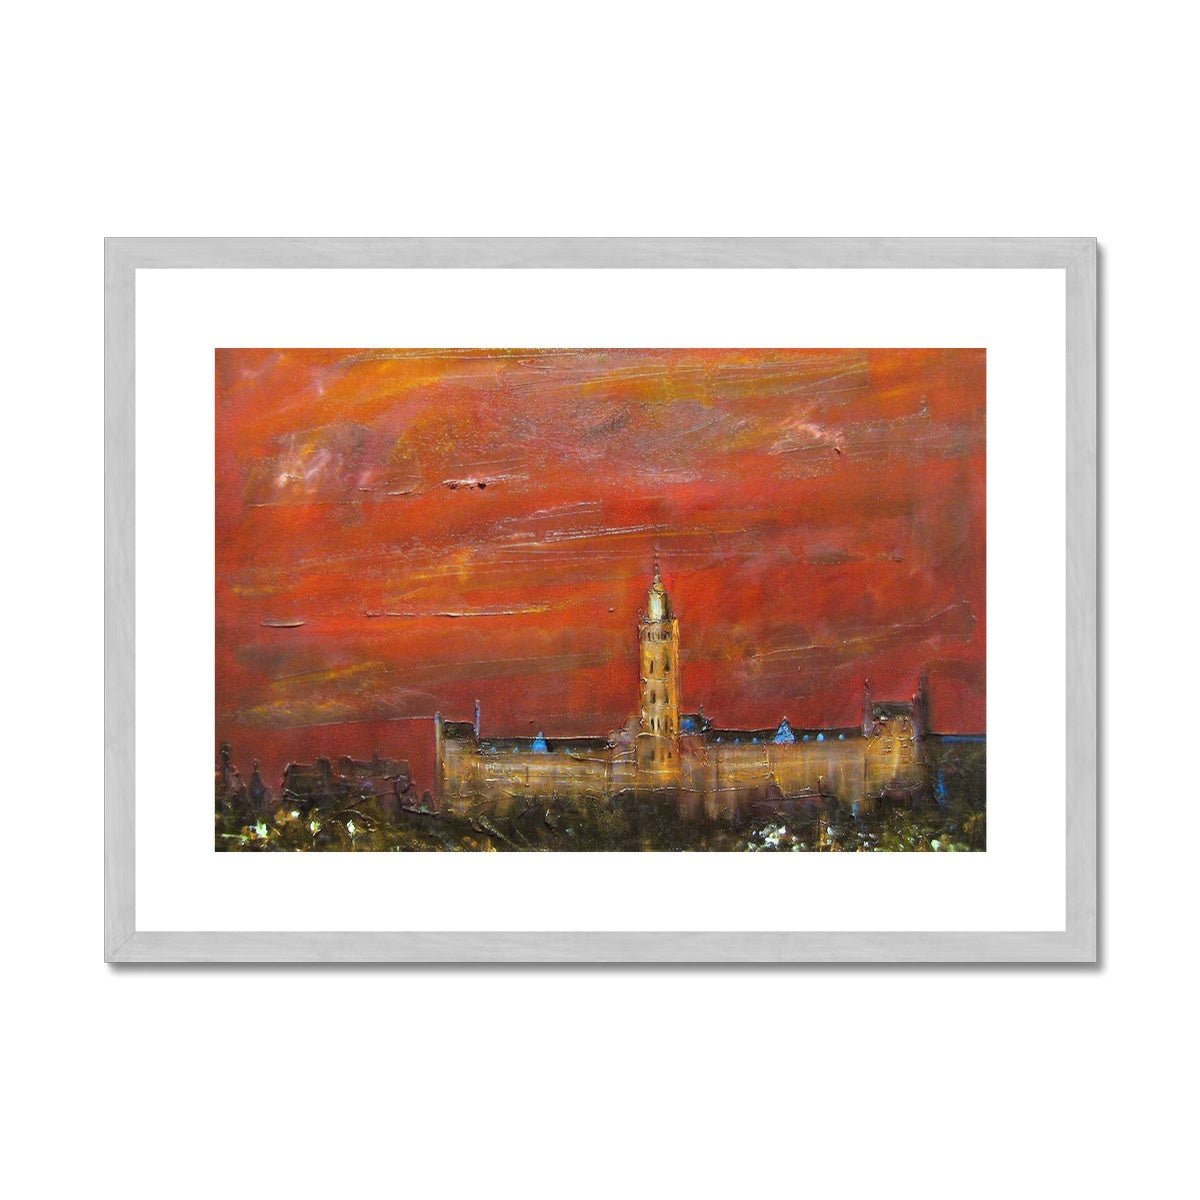 Glasgow University Dusk Painting | Antique Framed & Mounted Prints From Scotland-Antique Framed & Mounted Prints-Edinburgh & Glasgow Art Gallery-A2 Landscape-Silver Frame-Paintings, Prints, Homeware, Art Gifts From Scotland By Scottish Artist Kevin Hunter